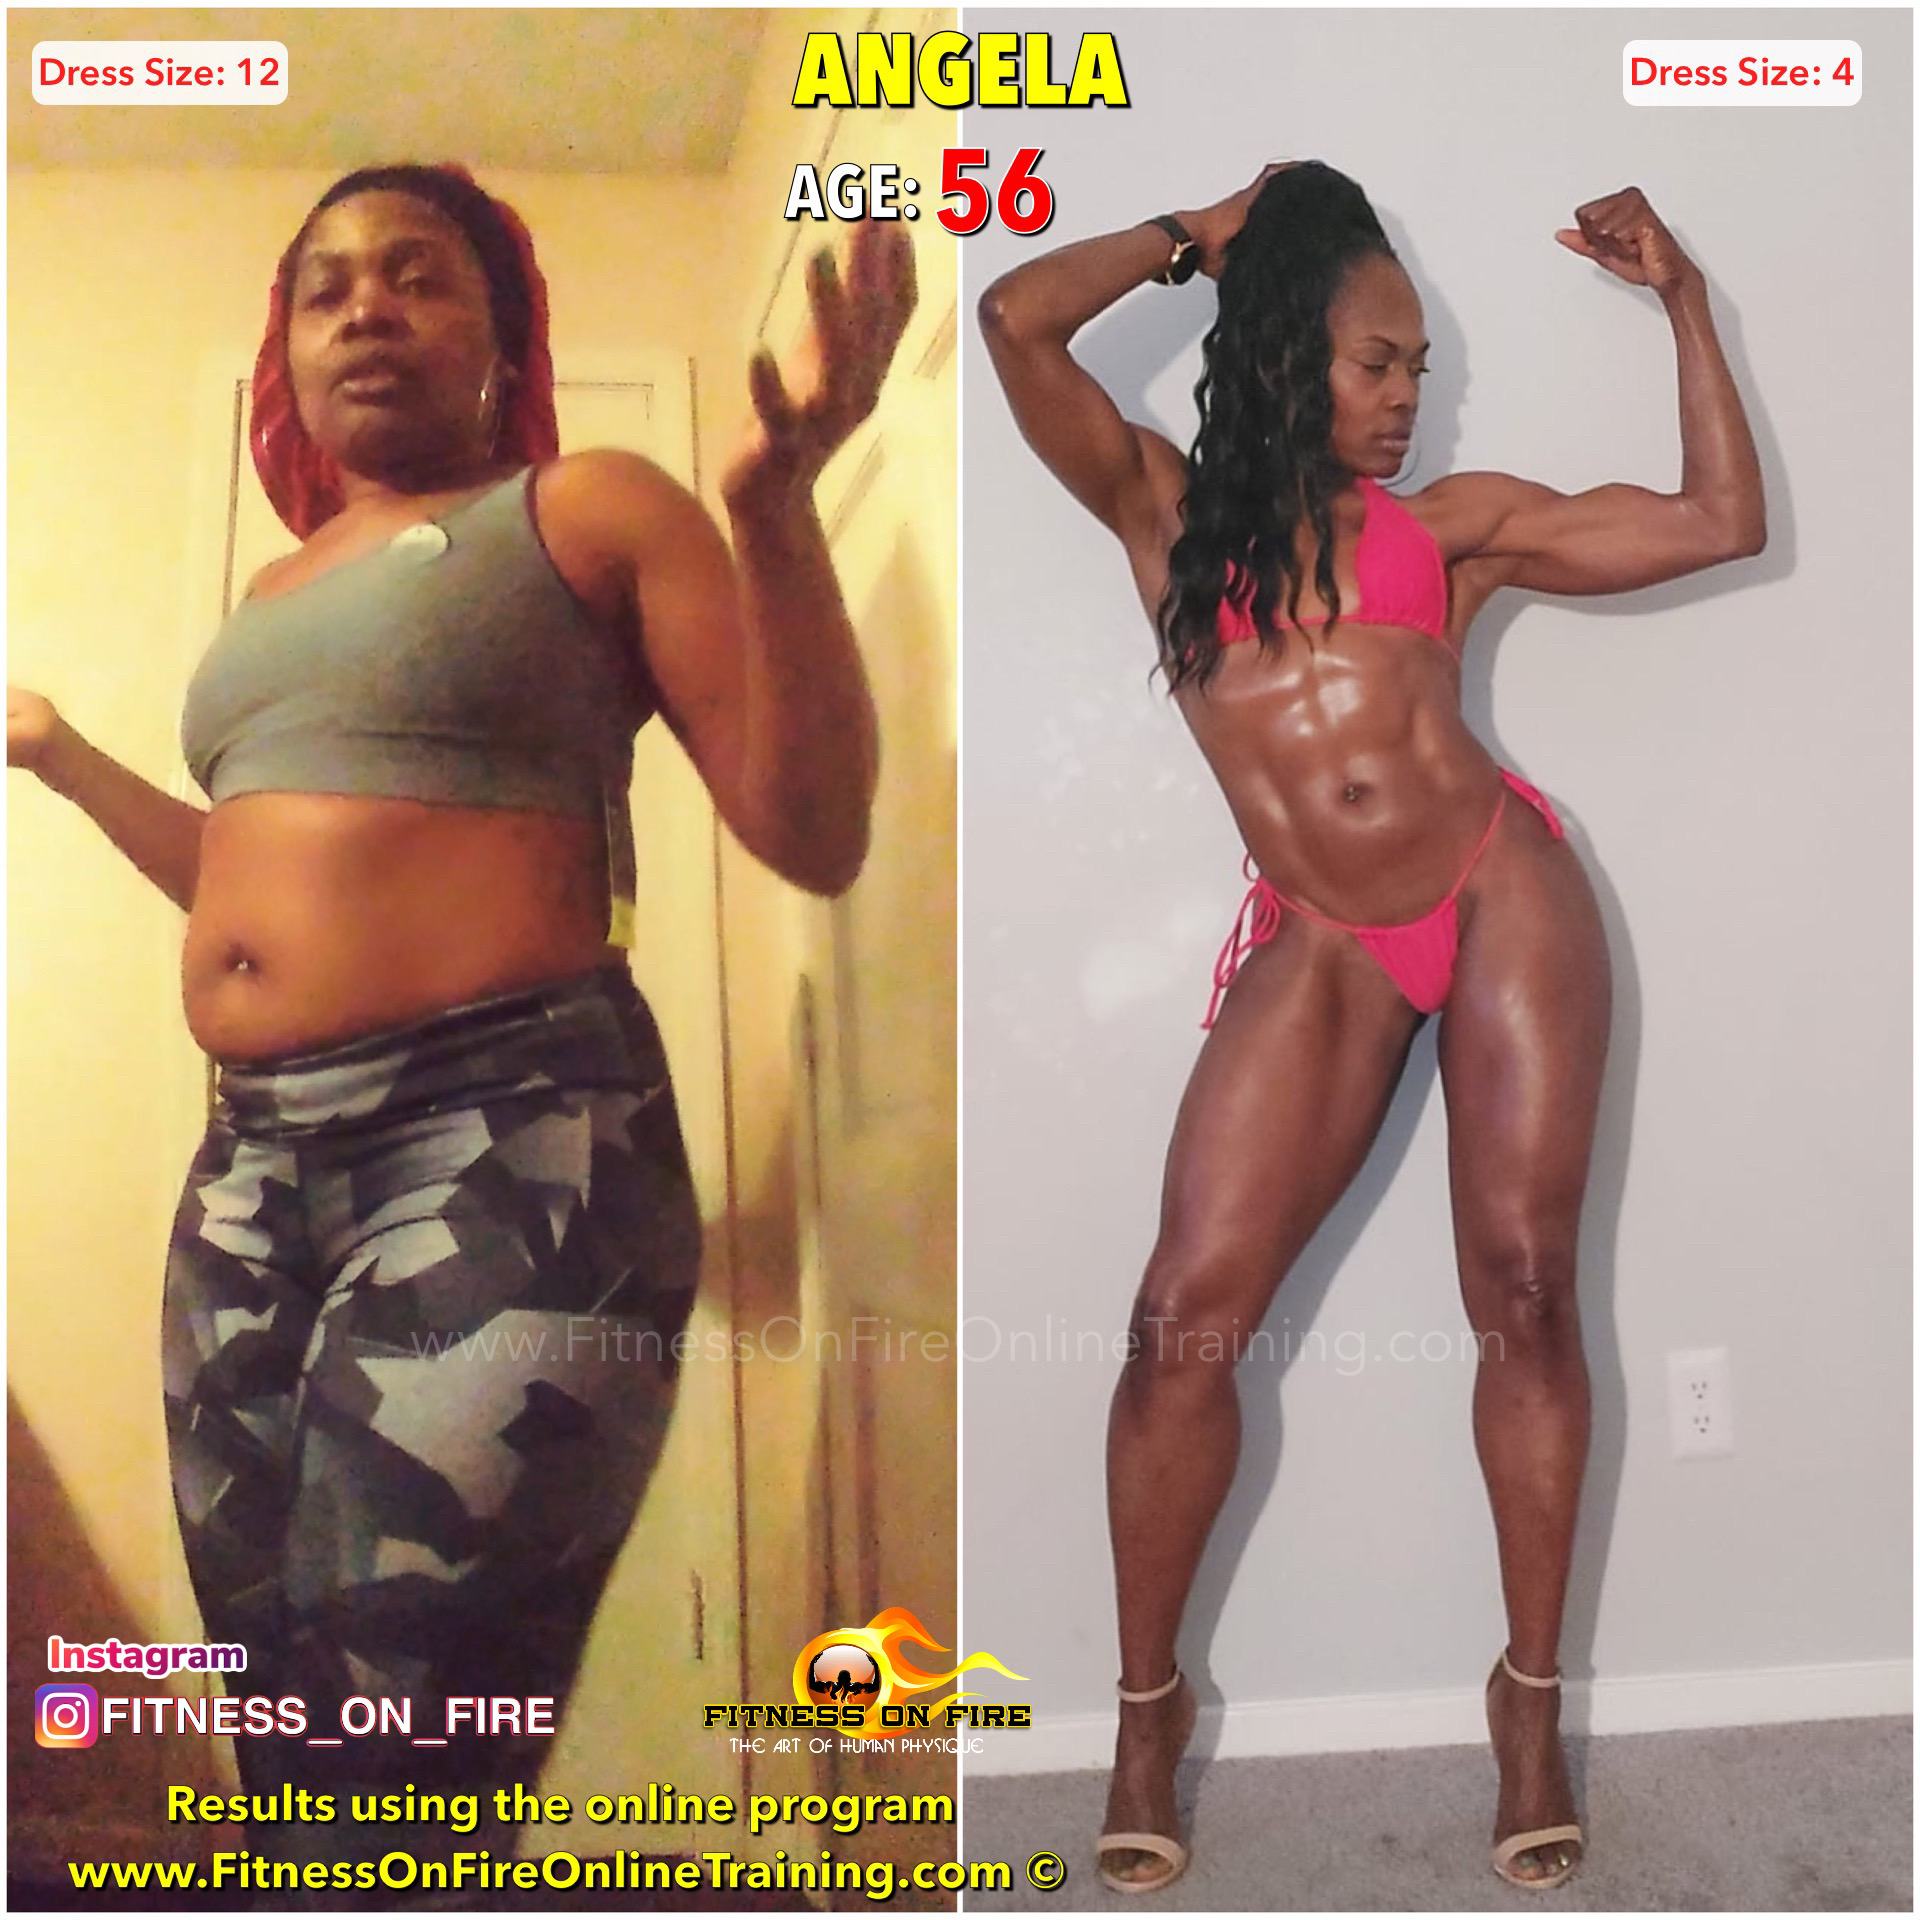 56 YEAR OLD ANGELA'S AMAZING ONLINE BODY TRANSFORMATION USING THE